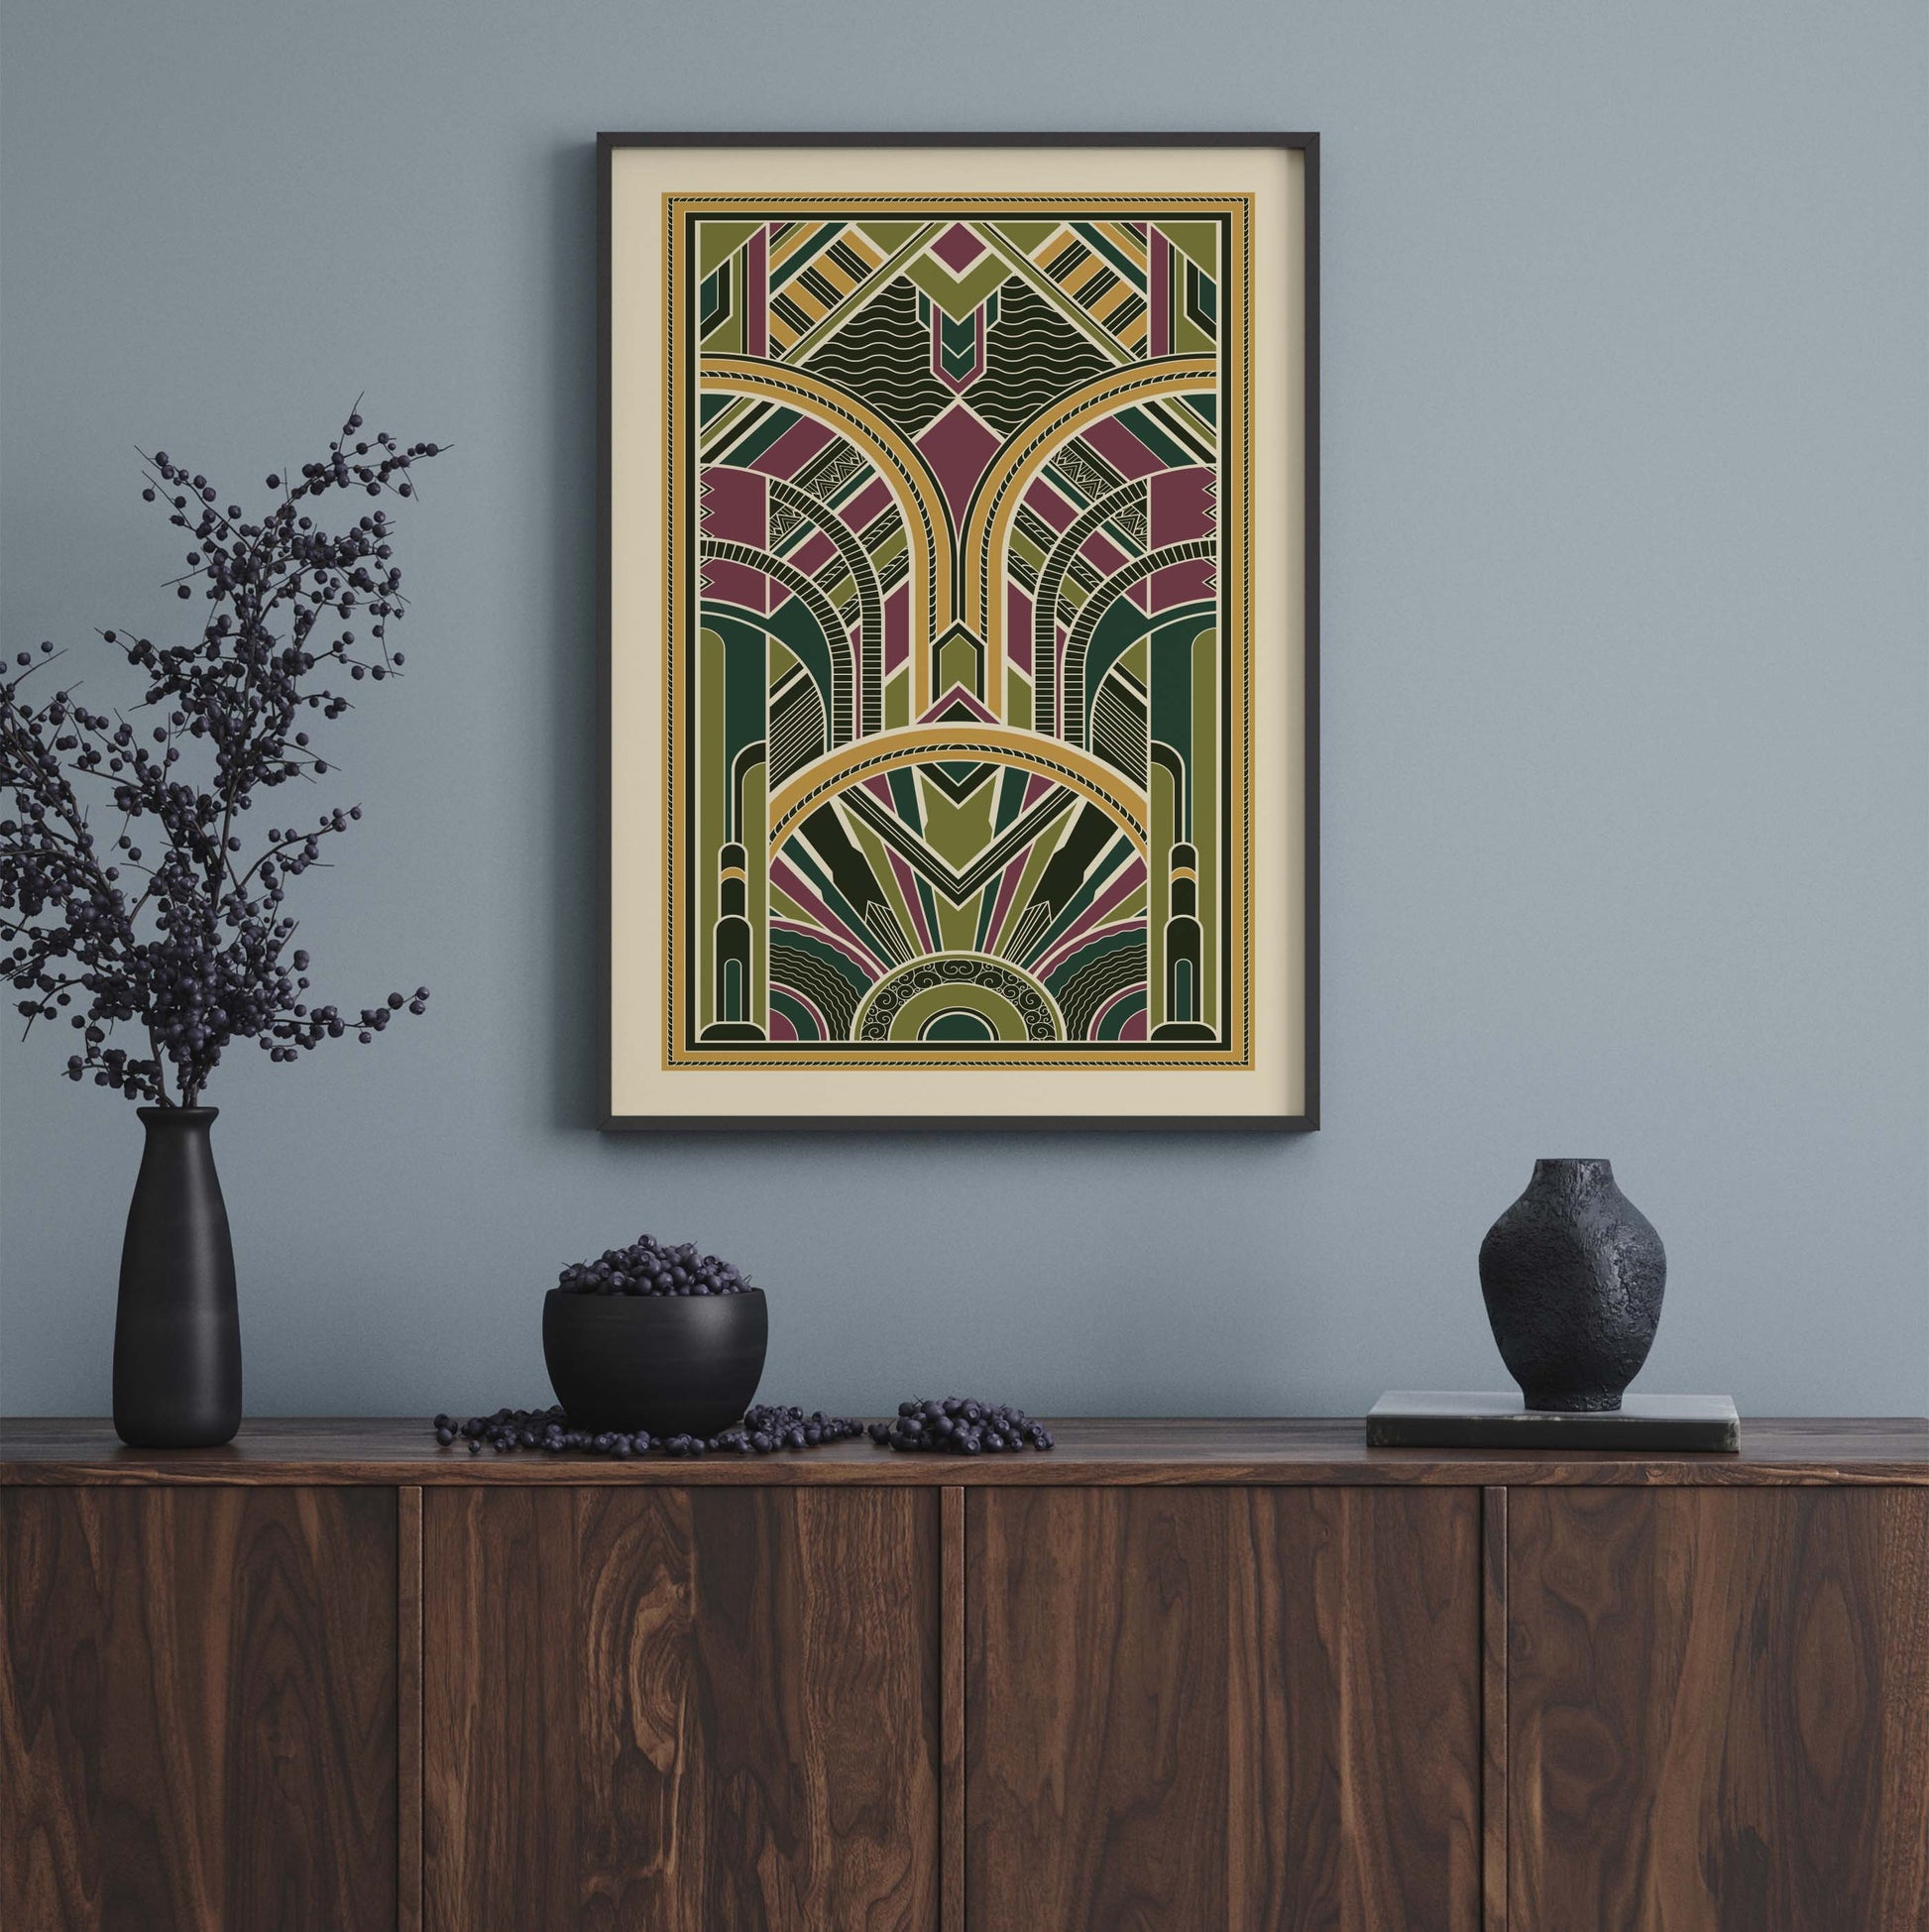 Art Deco print with symmetrical pattern in green